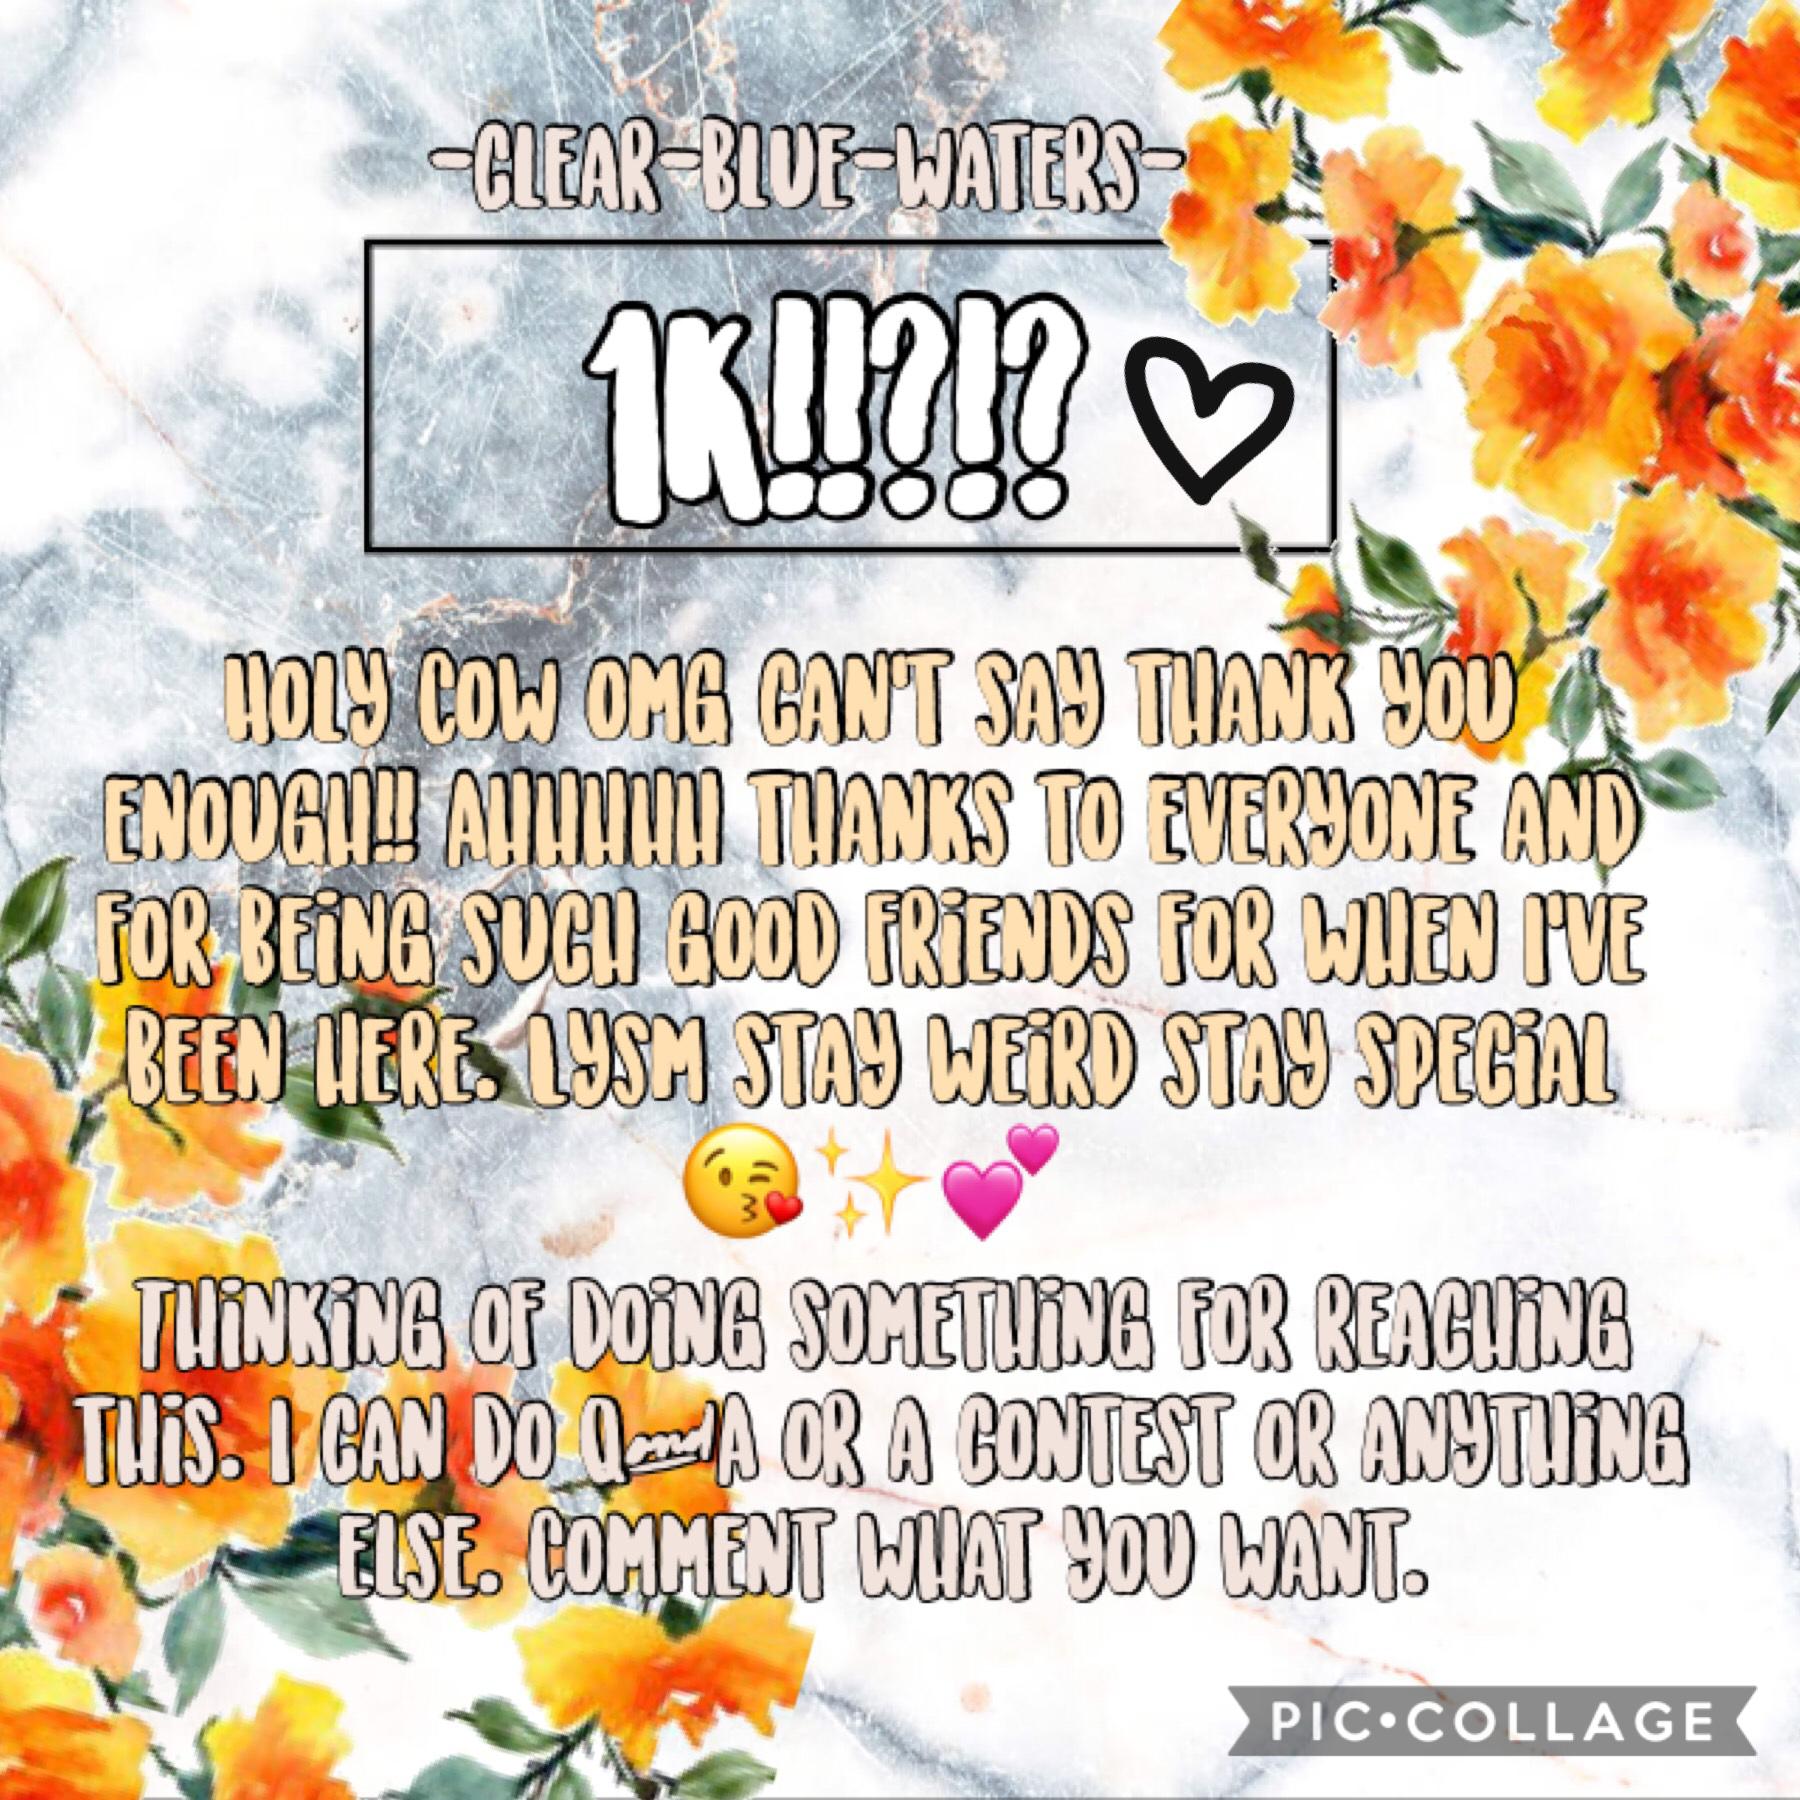 Comment ideas for a fun things to do for reaching 1K!! 